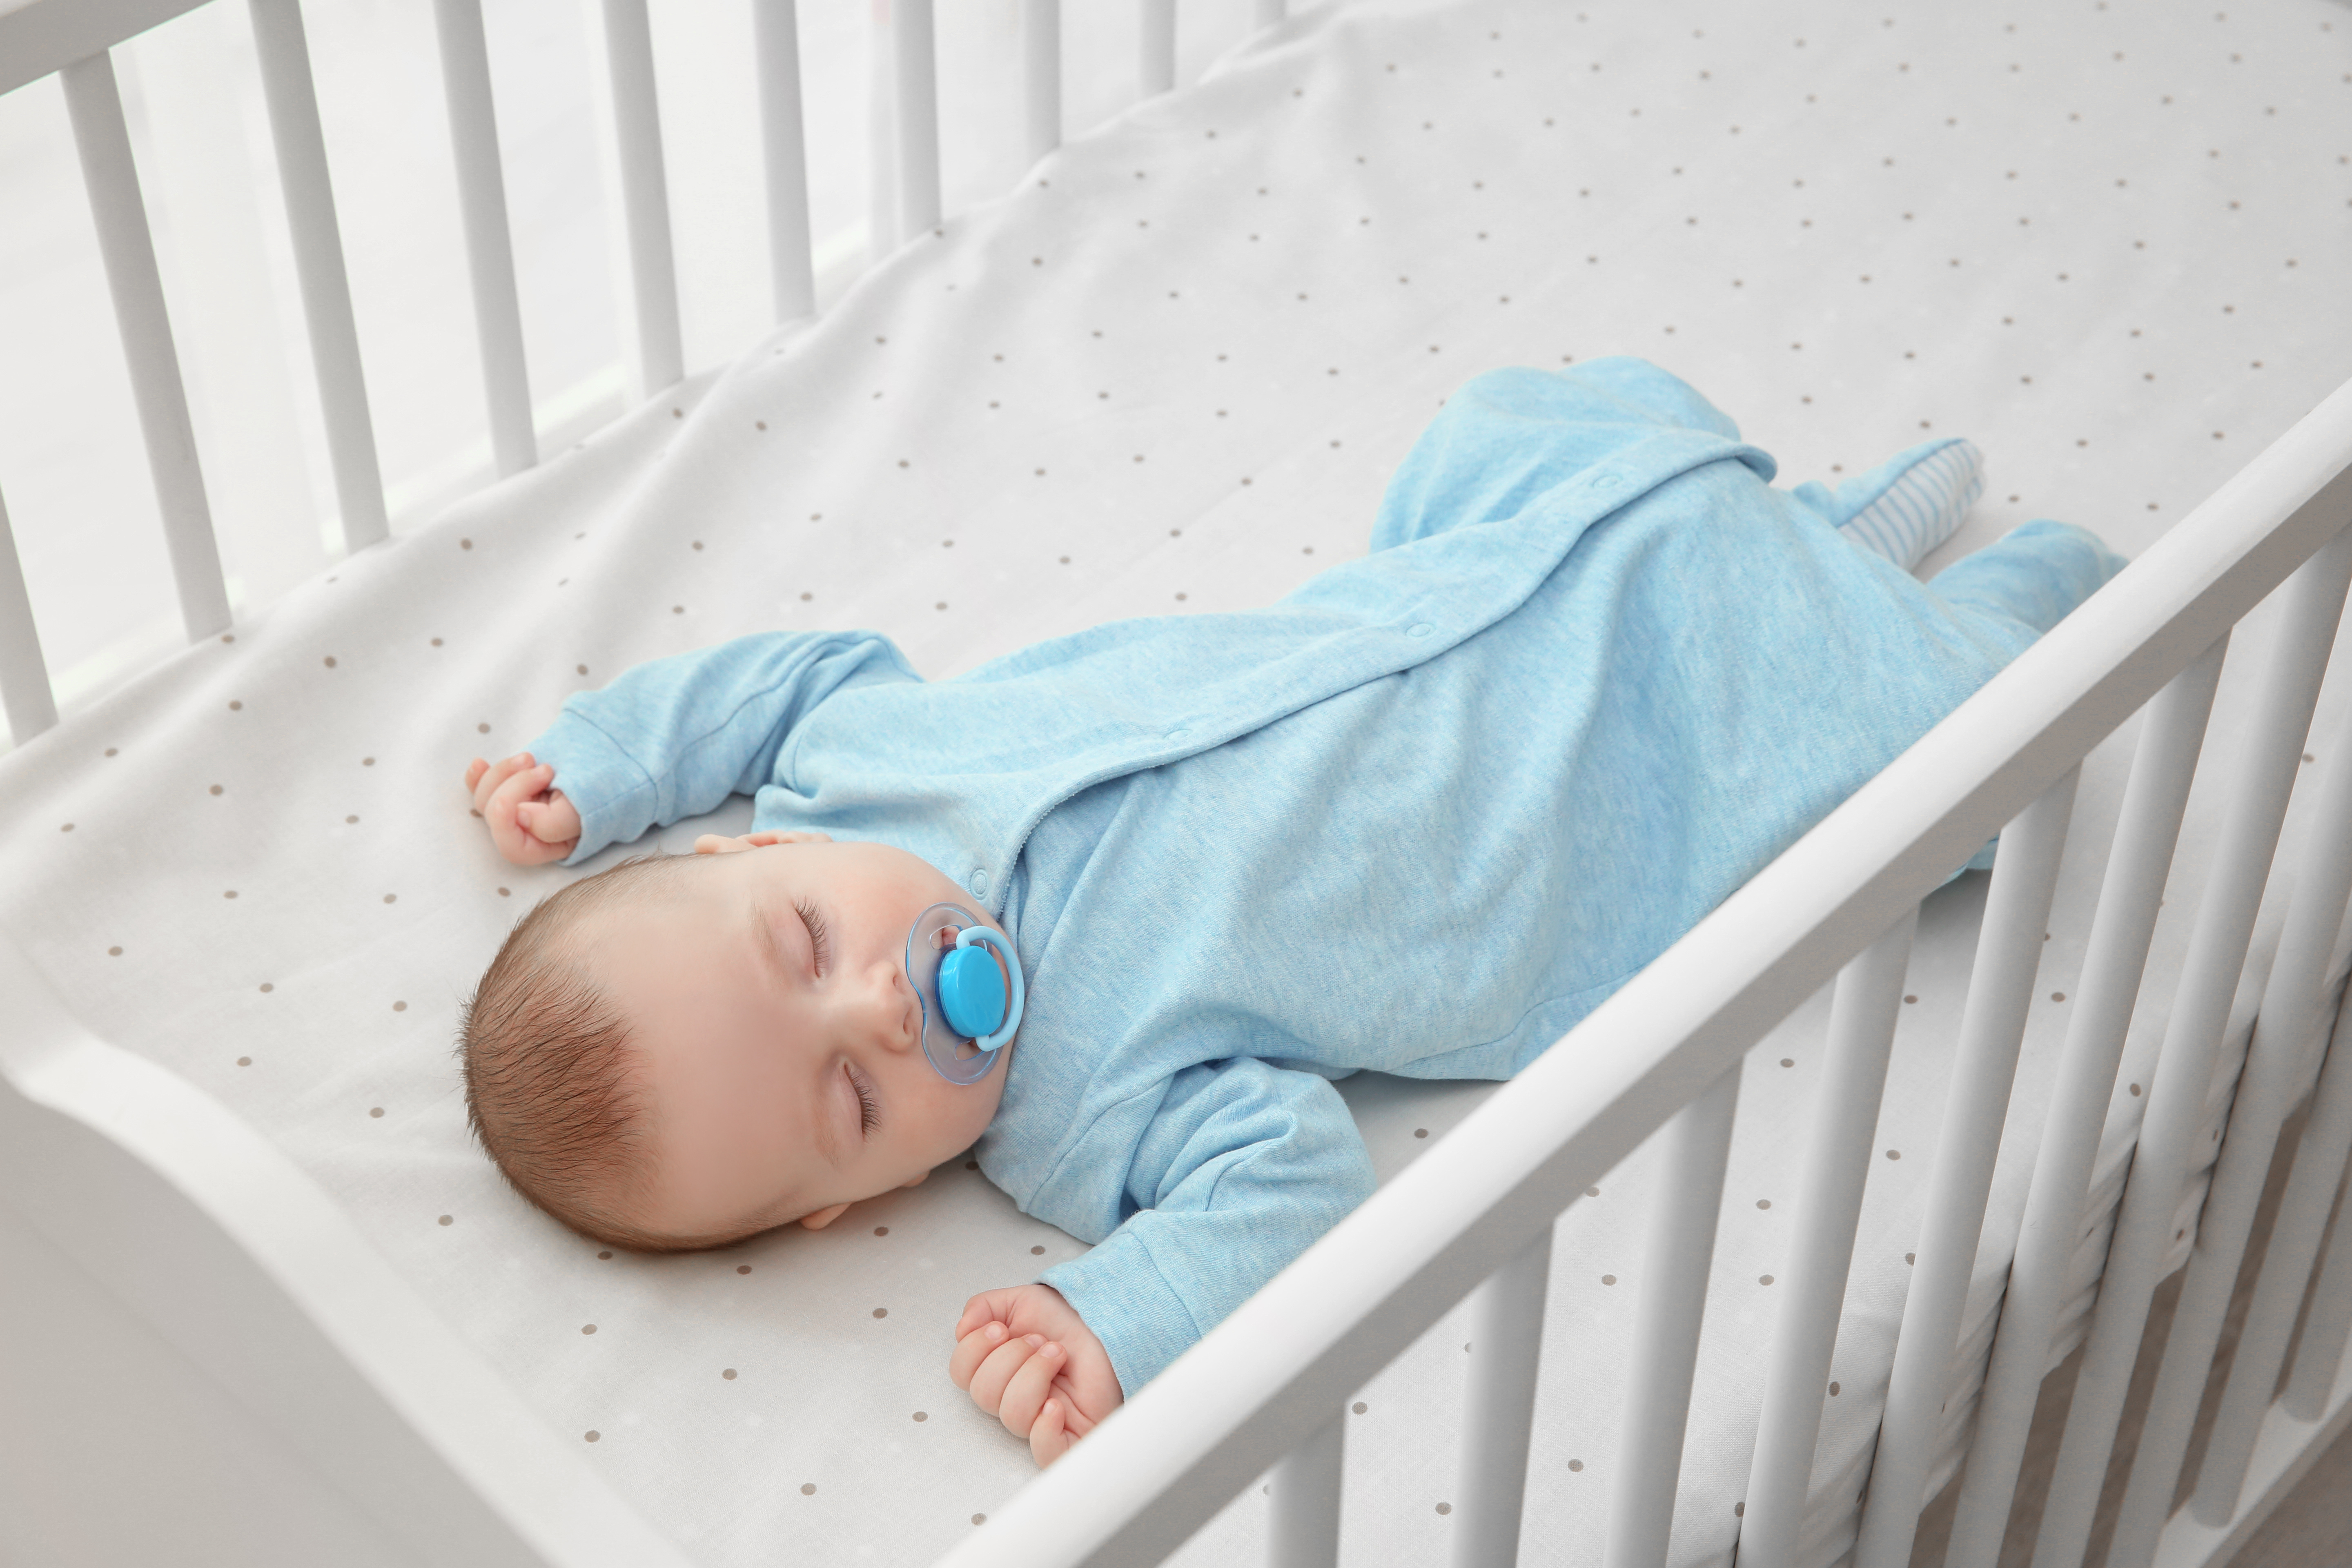 A baby asleep alone on his back in a bare crib. The baby is wearing one-piece sleepwear.